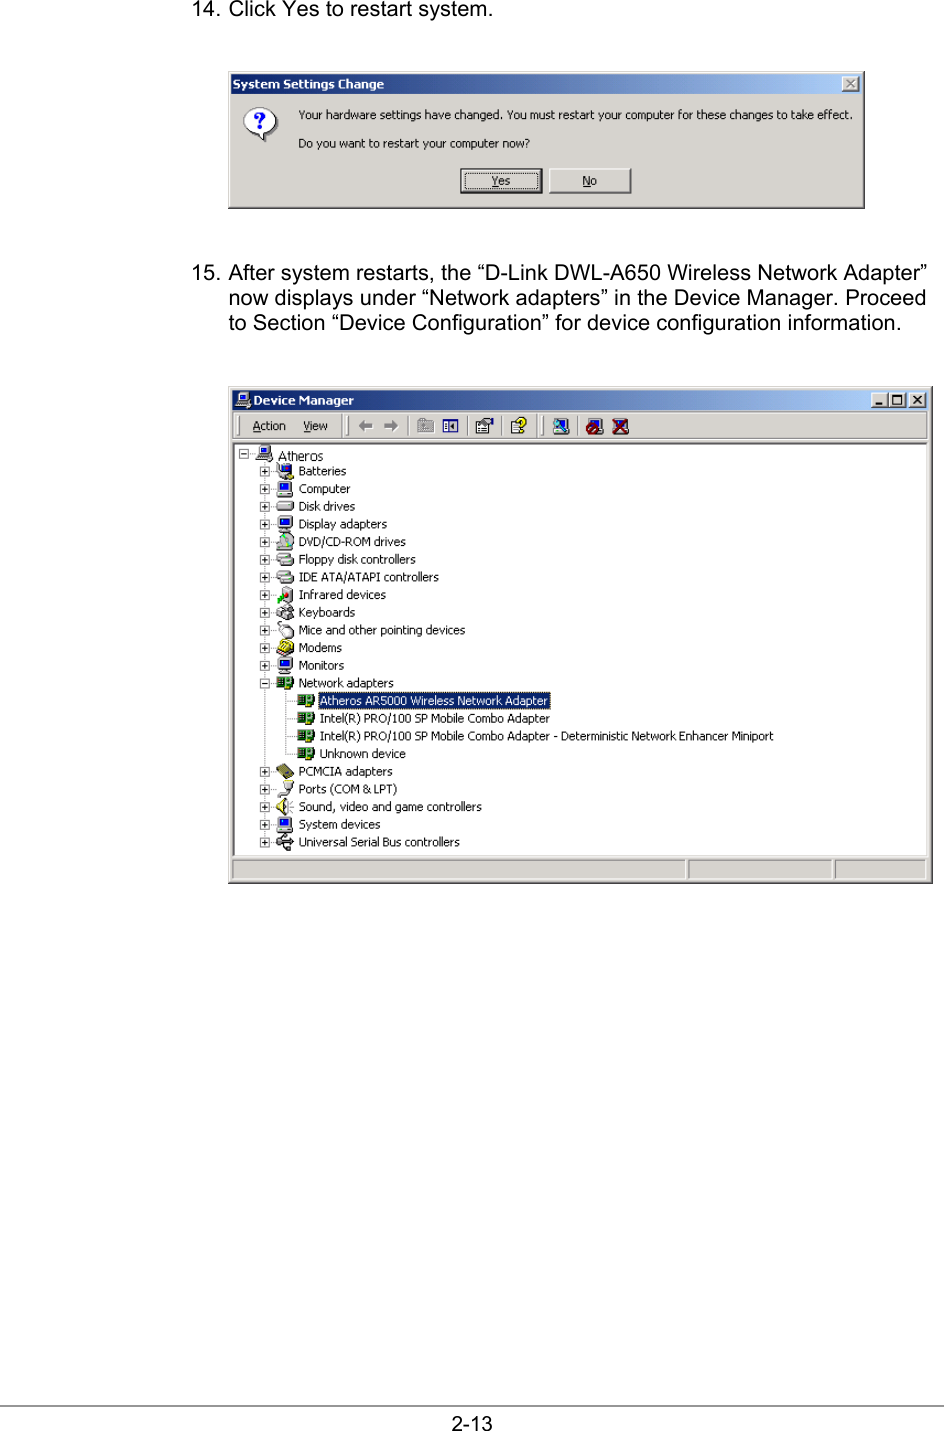  2-13 14. Click Yes to restart system.   15. After system restarts, the “D-Link DWL-A650 Wireless Network Adapter” now displays under “Network adapters” in the Device Manager. Proceed to Section “Device Configuration” for device configuration information.   